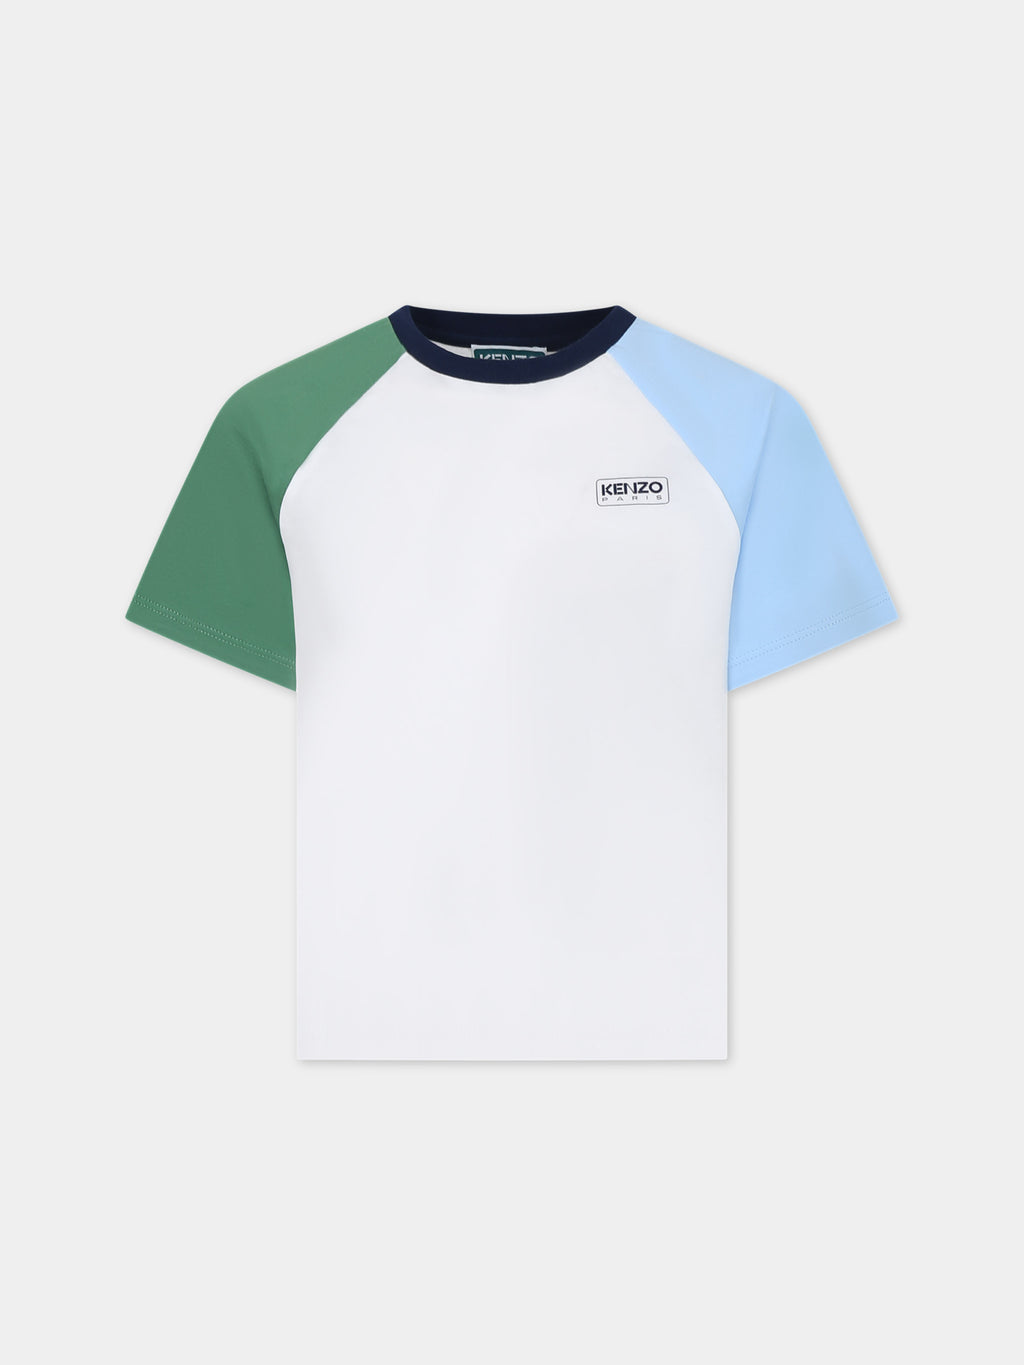 Multicolor t-shirt for kids with logo